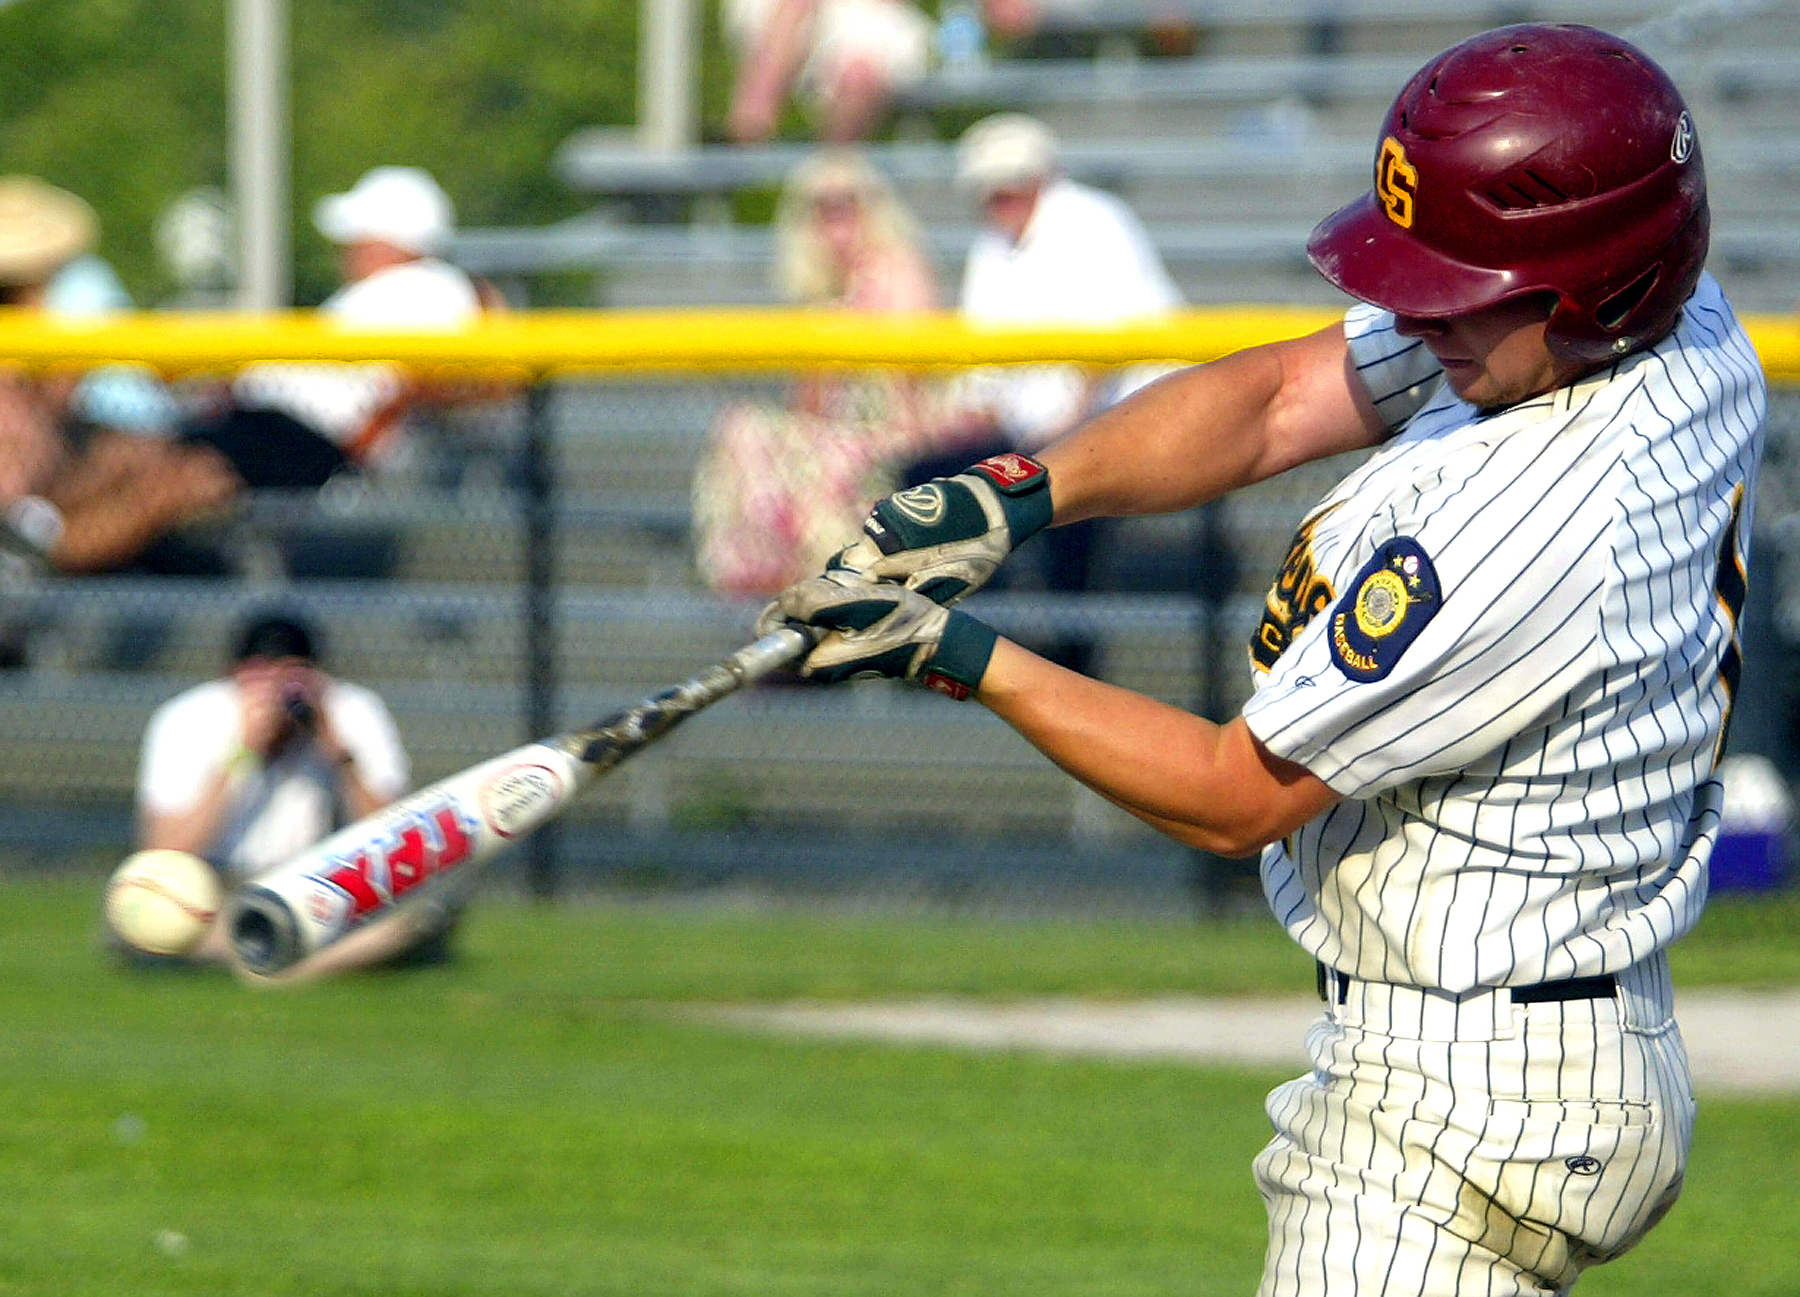 For young baseball players, light bats don't hit too fast